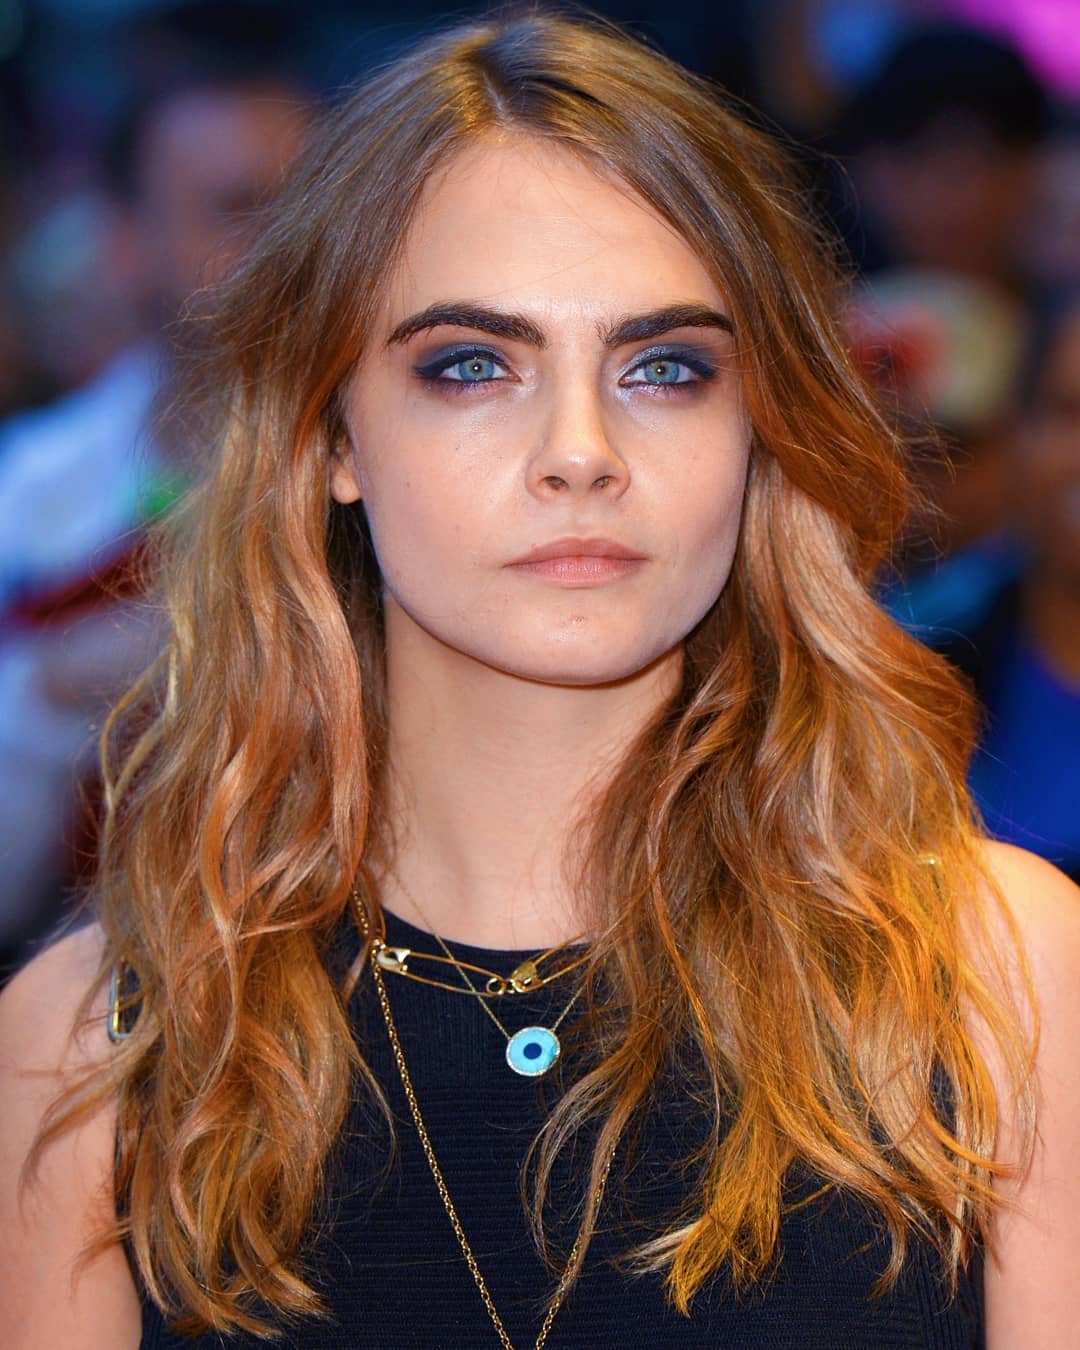 Cara DelevingneWest Age, Height, Wife, Family – Biographyprofiles